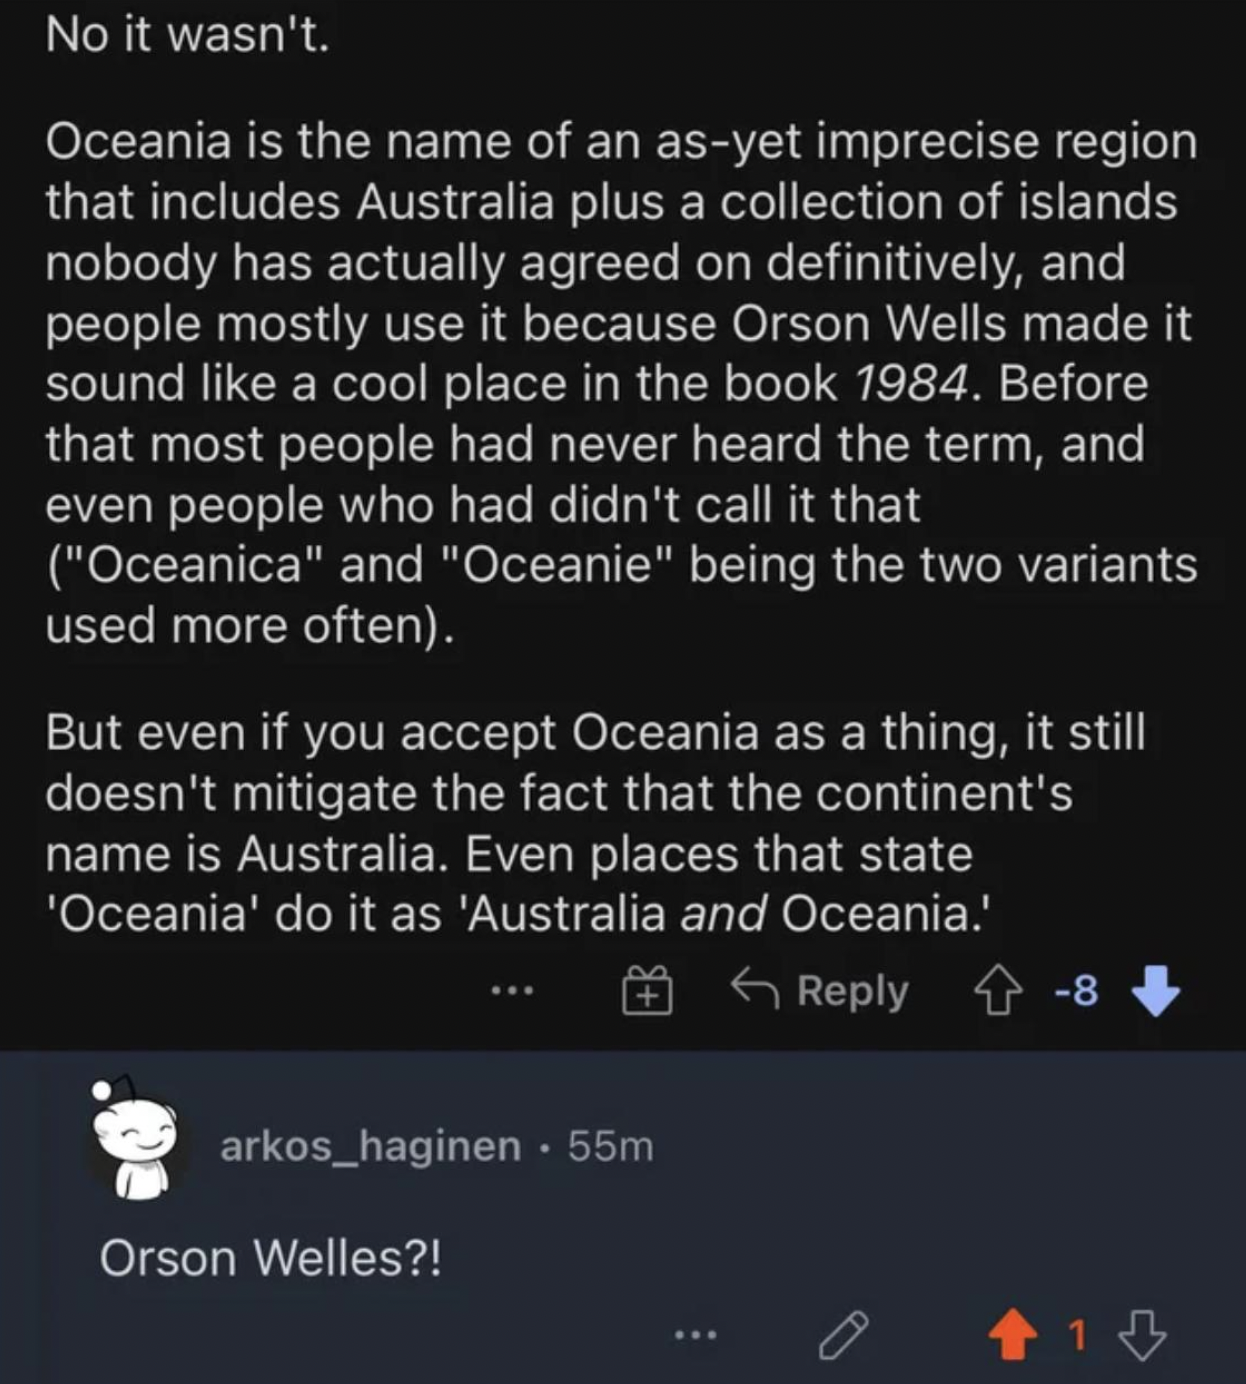 Confidently Incorrect - screenshot - No it wasn't. Oceania is the name of an asyet imprecise region that includes Australia plus a collection of islands nobody has actually agreed on definitively, and people mostly use it because Orson Wells made it sound